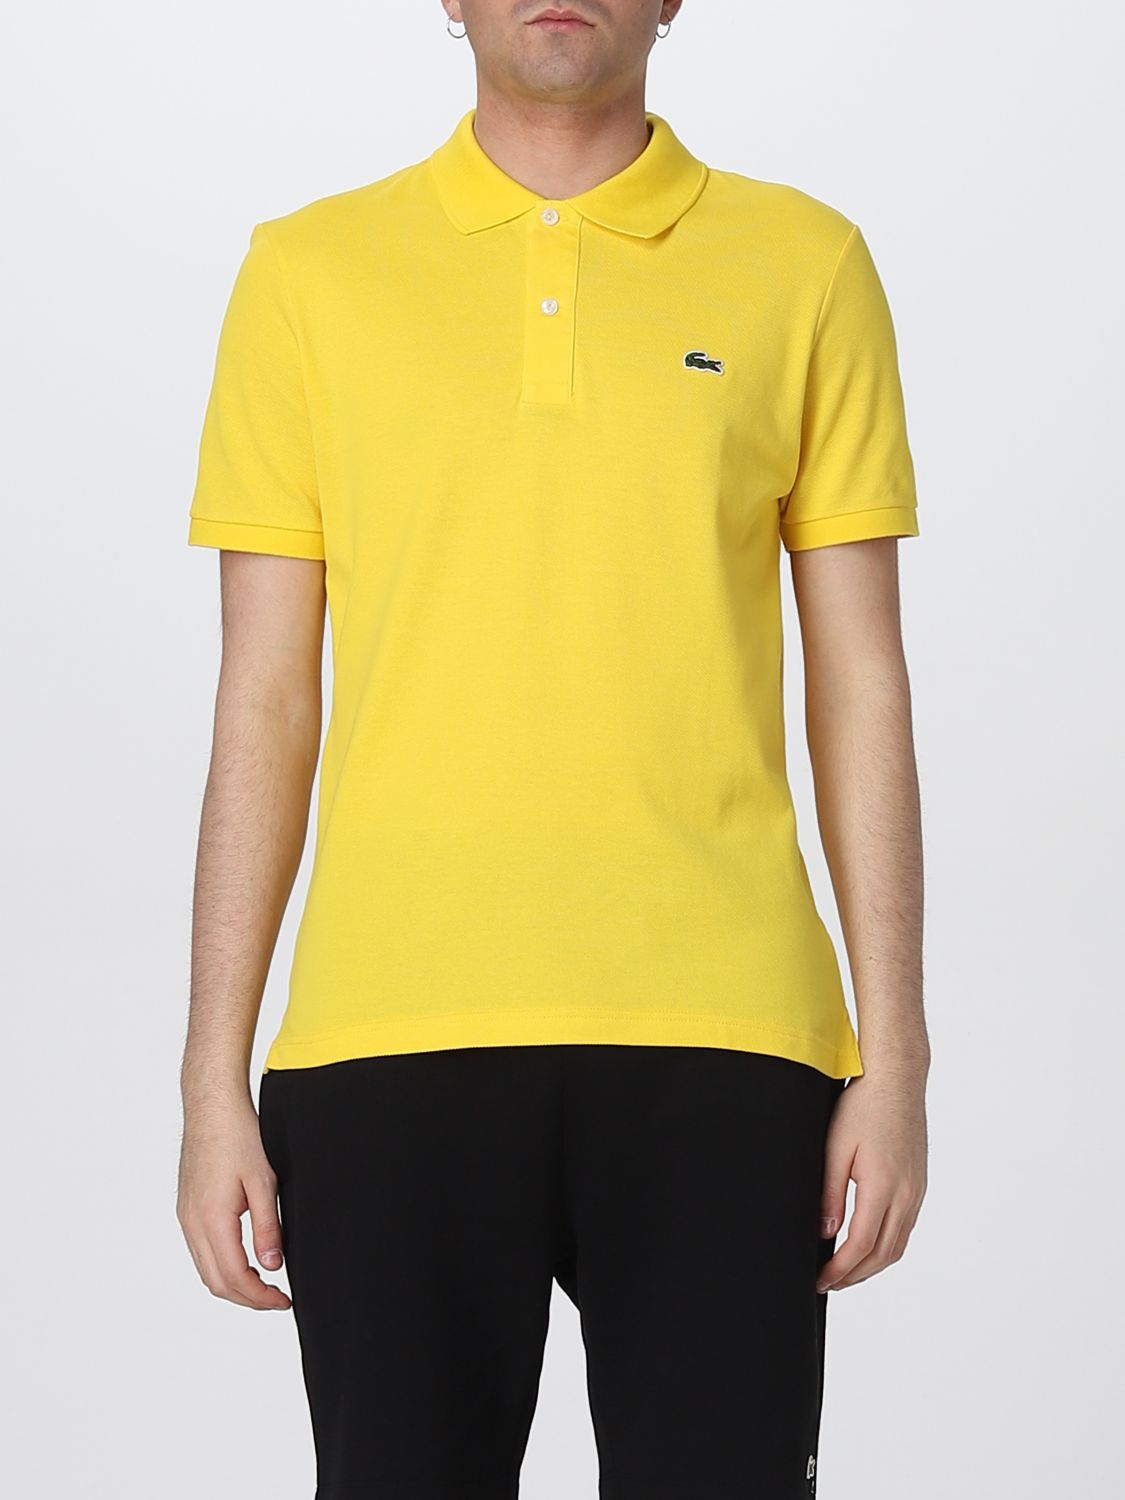 LACOSTE: polo shirt for man - Yellow | Lacoste polo shirt PH4012 online ...